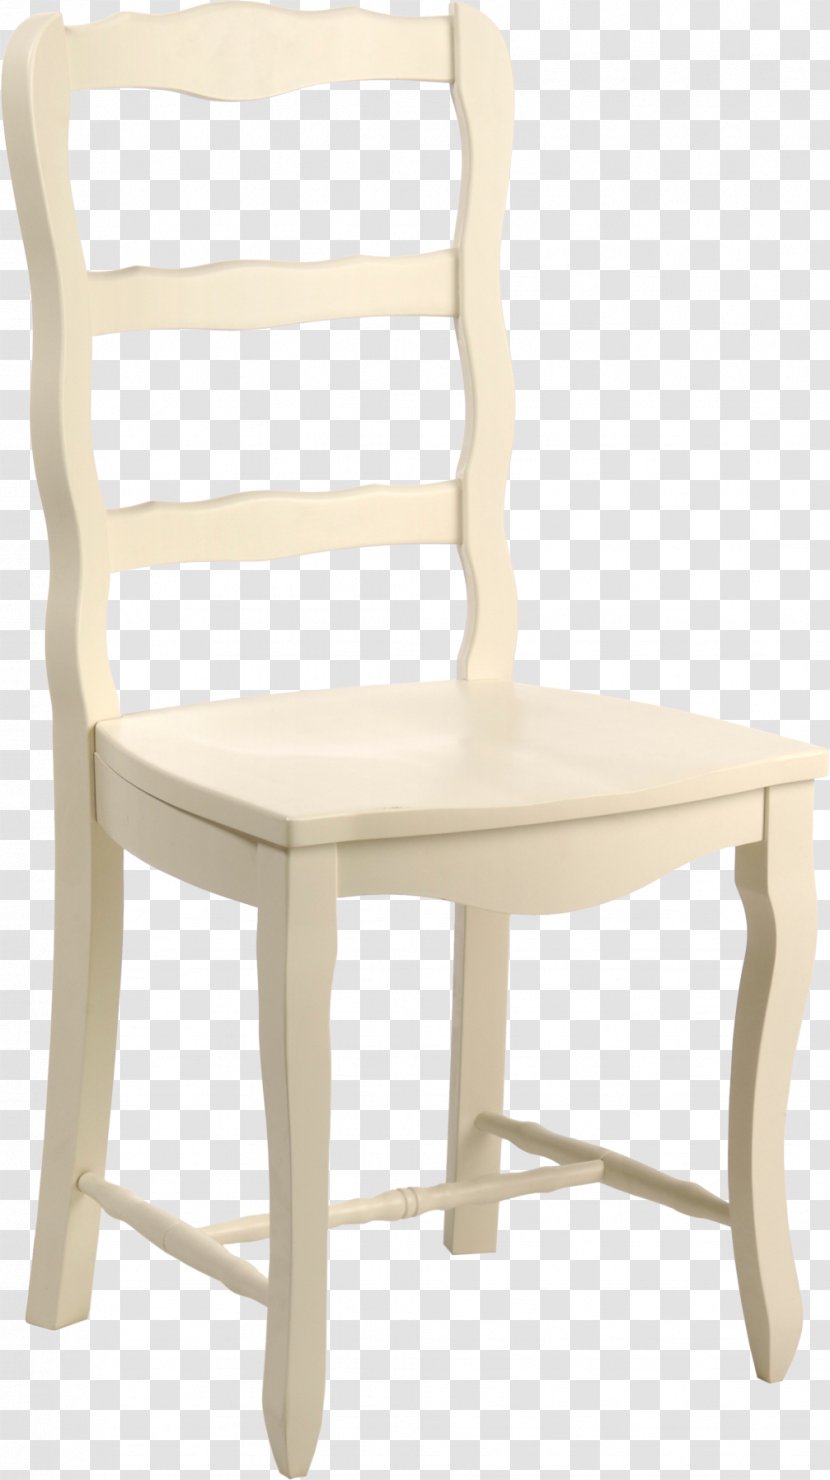 Table Chair Armrest Wood - Wooden Chairs Transparent PNG